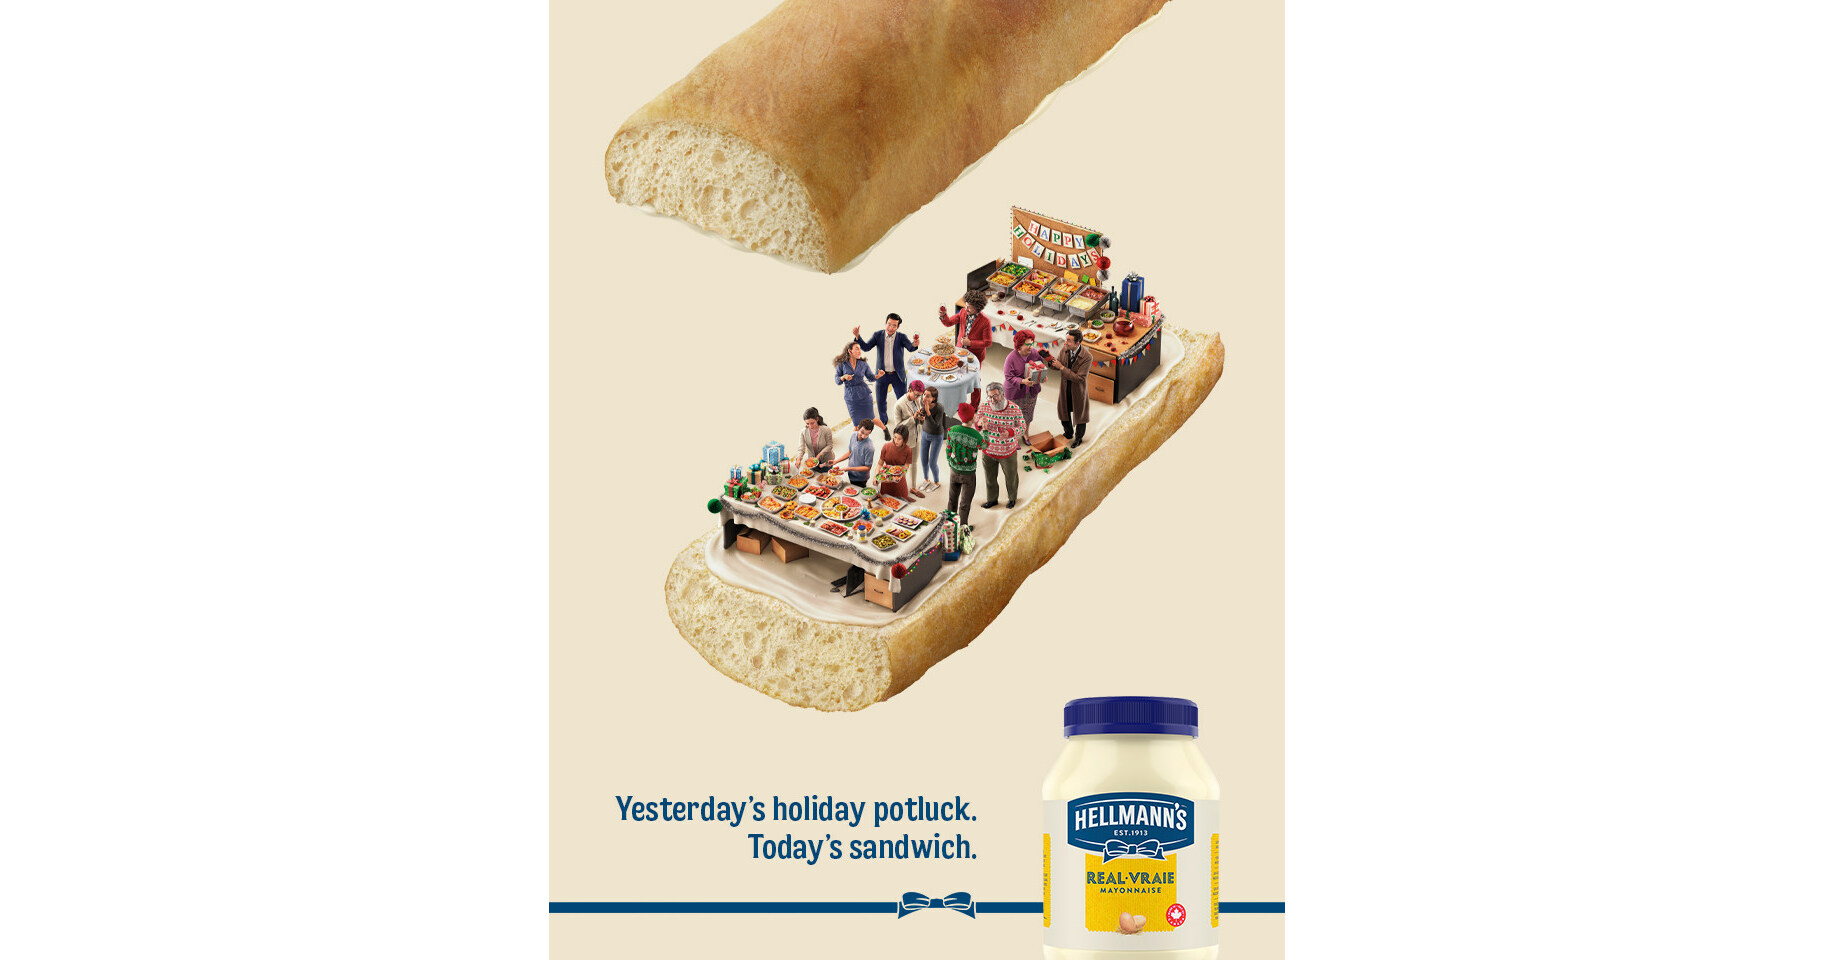 Hellmann's Shows How Fighting Holiday Food Waste is as Simple as Putting  Leftovers 'Between 2 Slices' and Adding Some Mayo